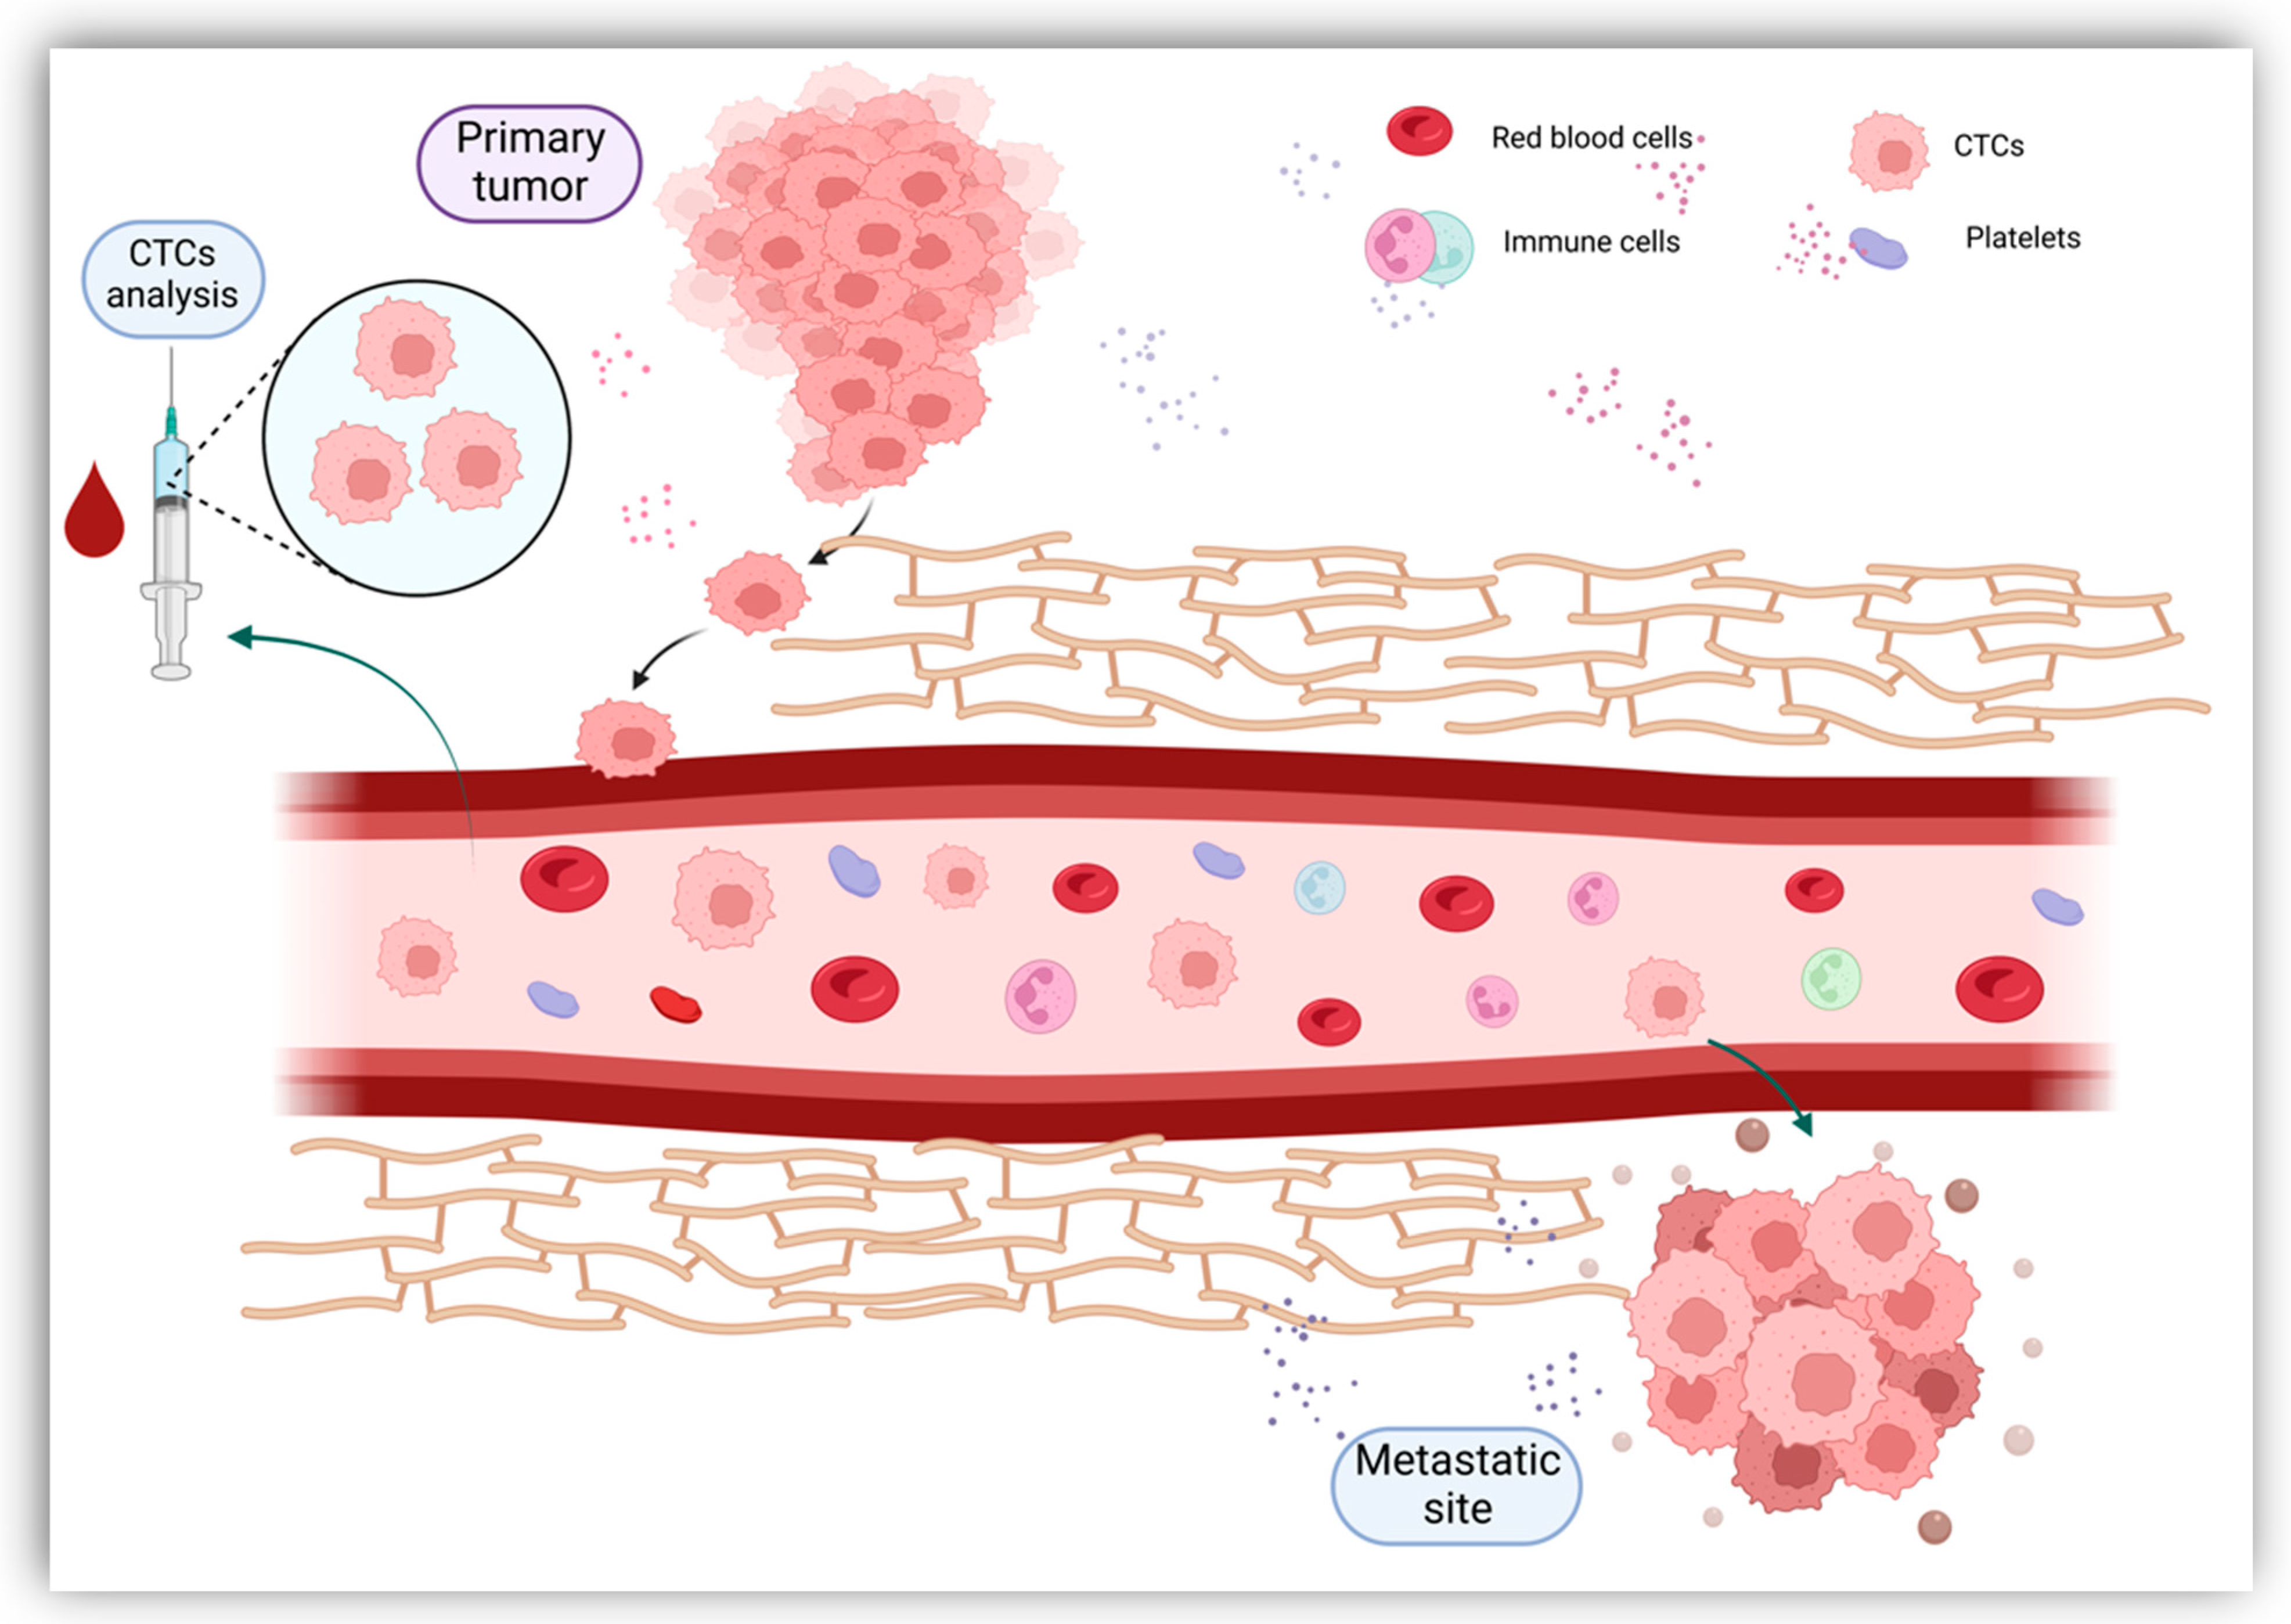 Cells | Free Full-Text | Clinical Applications of Liquid Biopsy in 